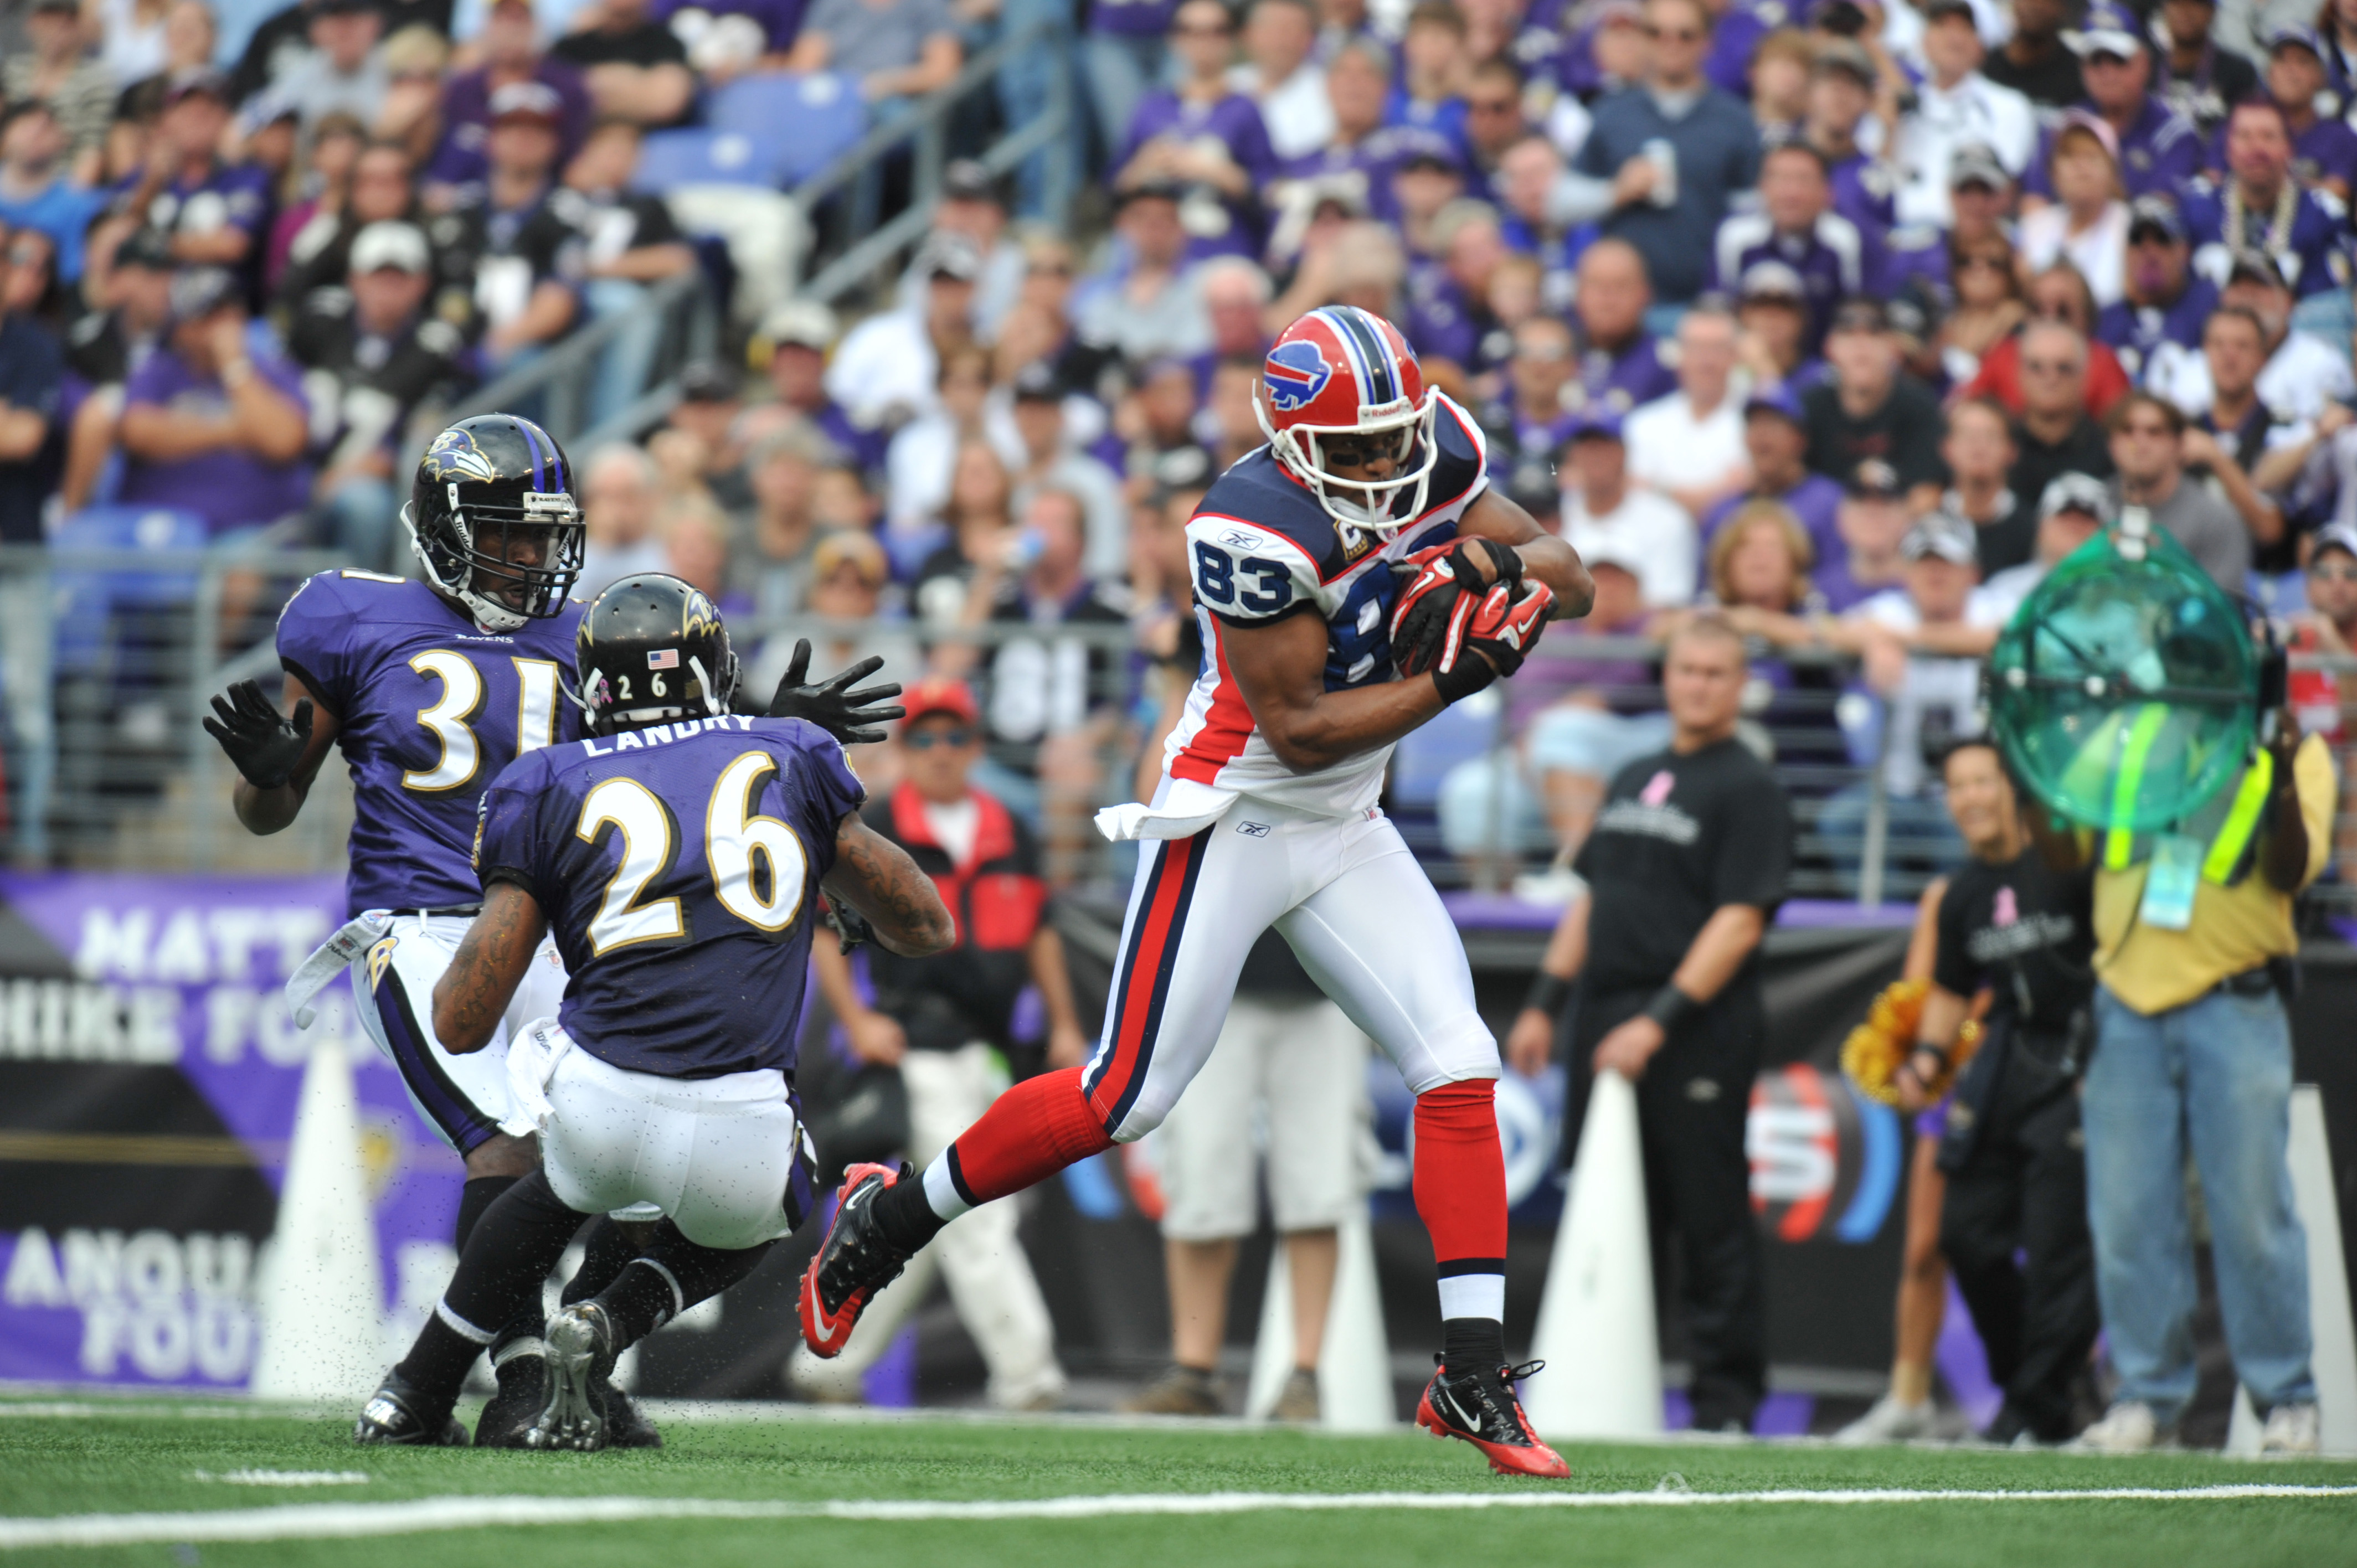 Lee Evans tourched the Ravens for 3 TDs